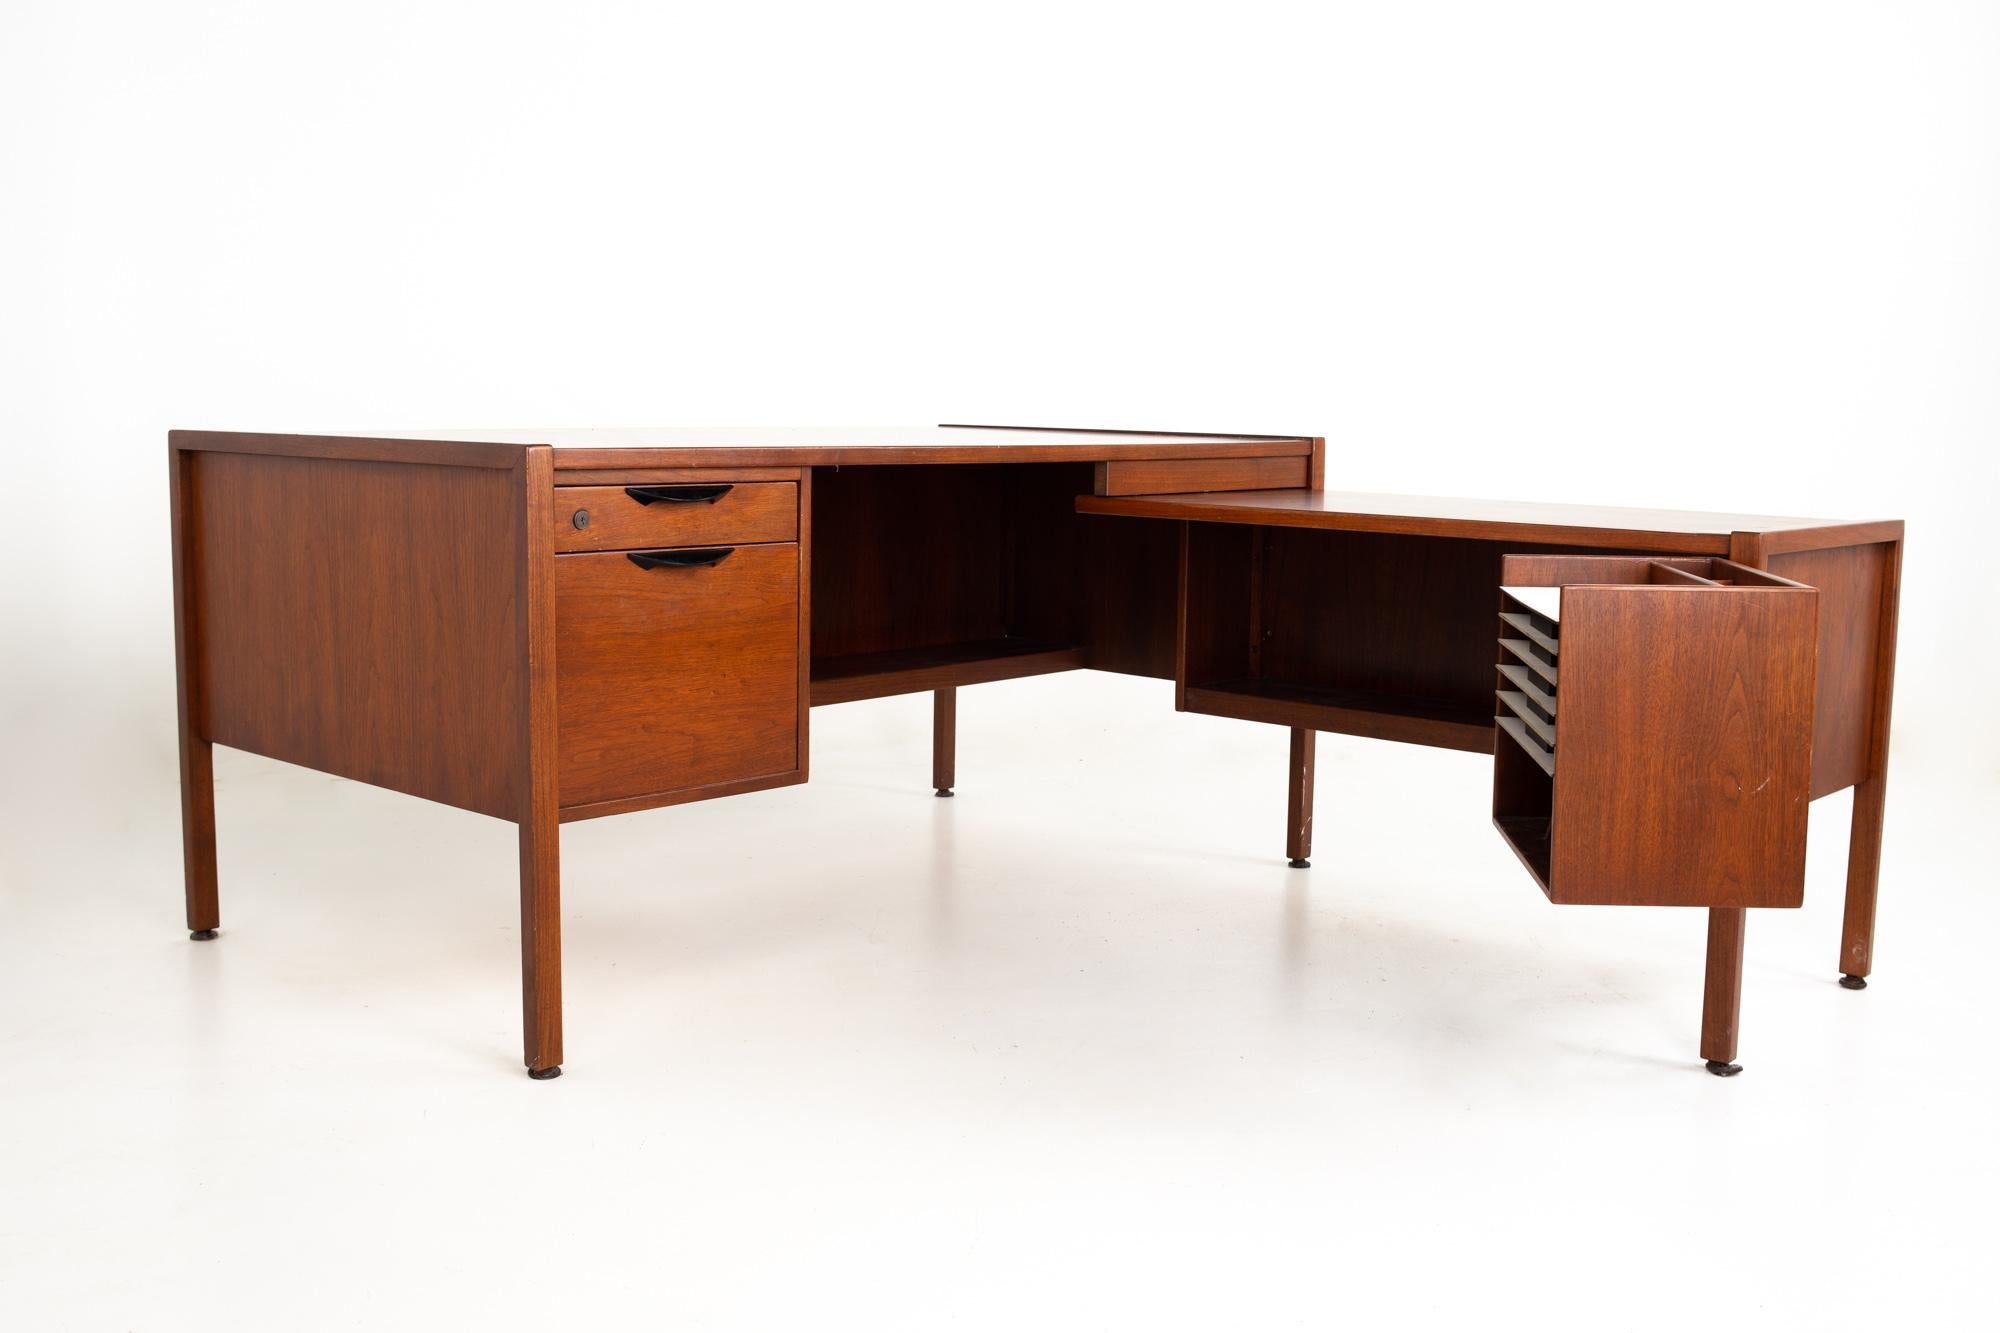 Jens Risom mid century L shaped walnut executive desk

Desk measures: 62 wide x 66.5 deep x 28.5 inches high, with a chair clearance of 24.5 inches

All pieces of furniture can be had in what we call restored vintage condition. That means the piece